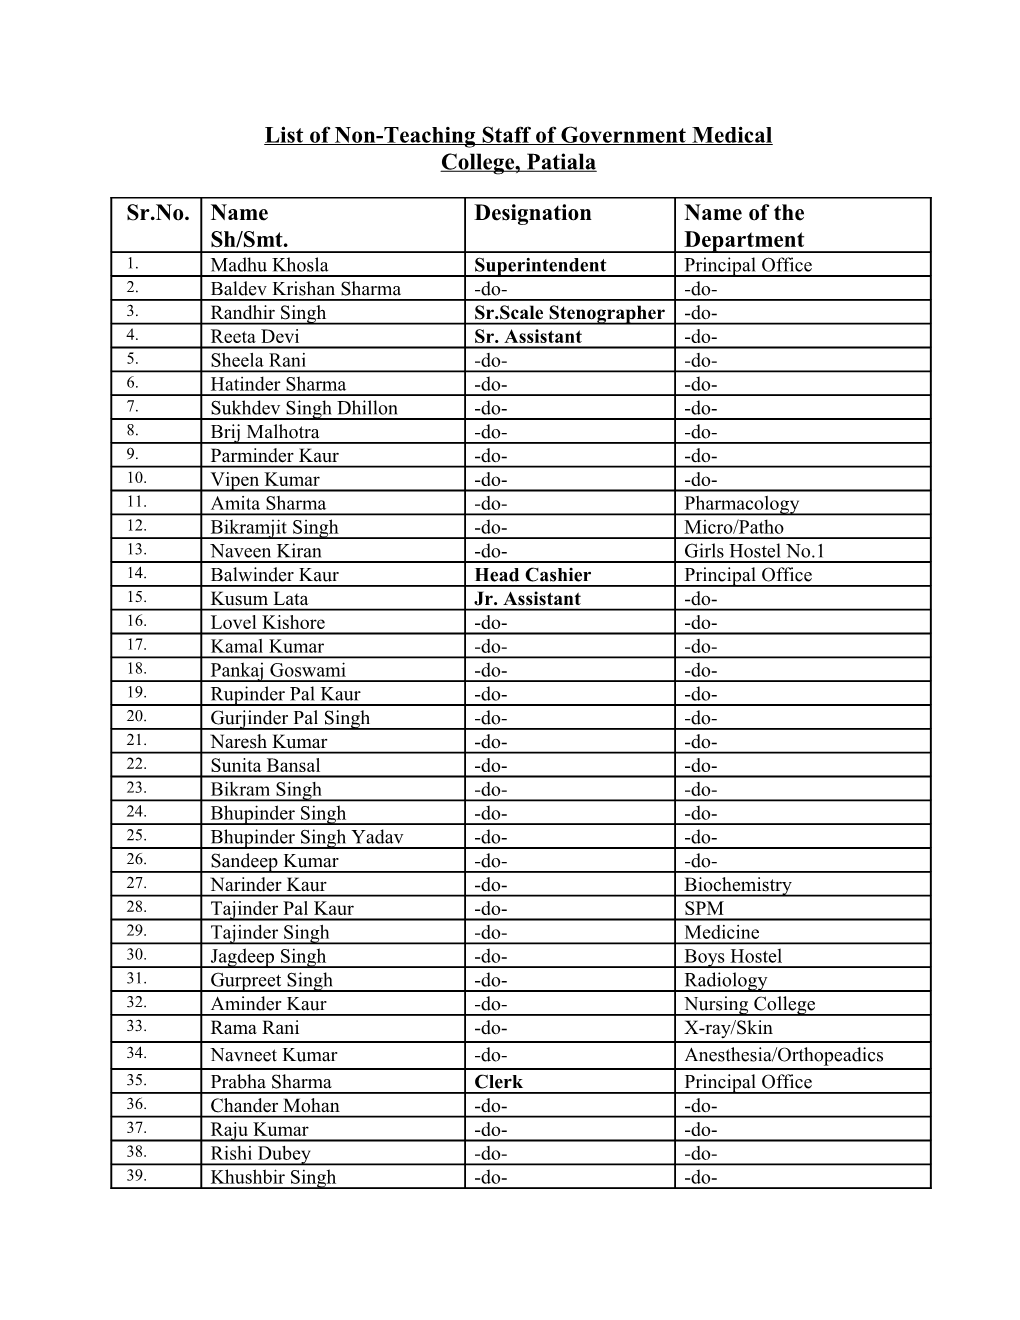 List of Non-Teaching Staff of Government Medical College, Patiala